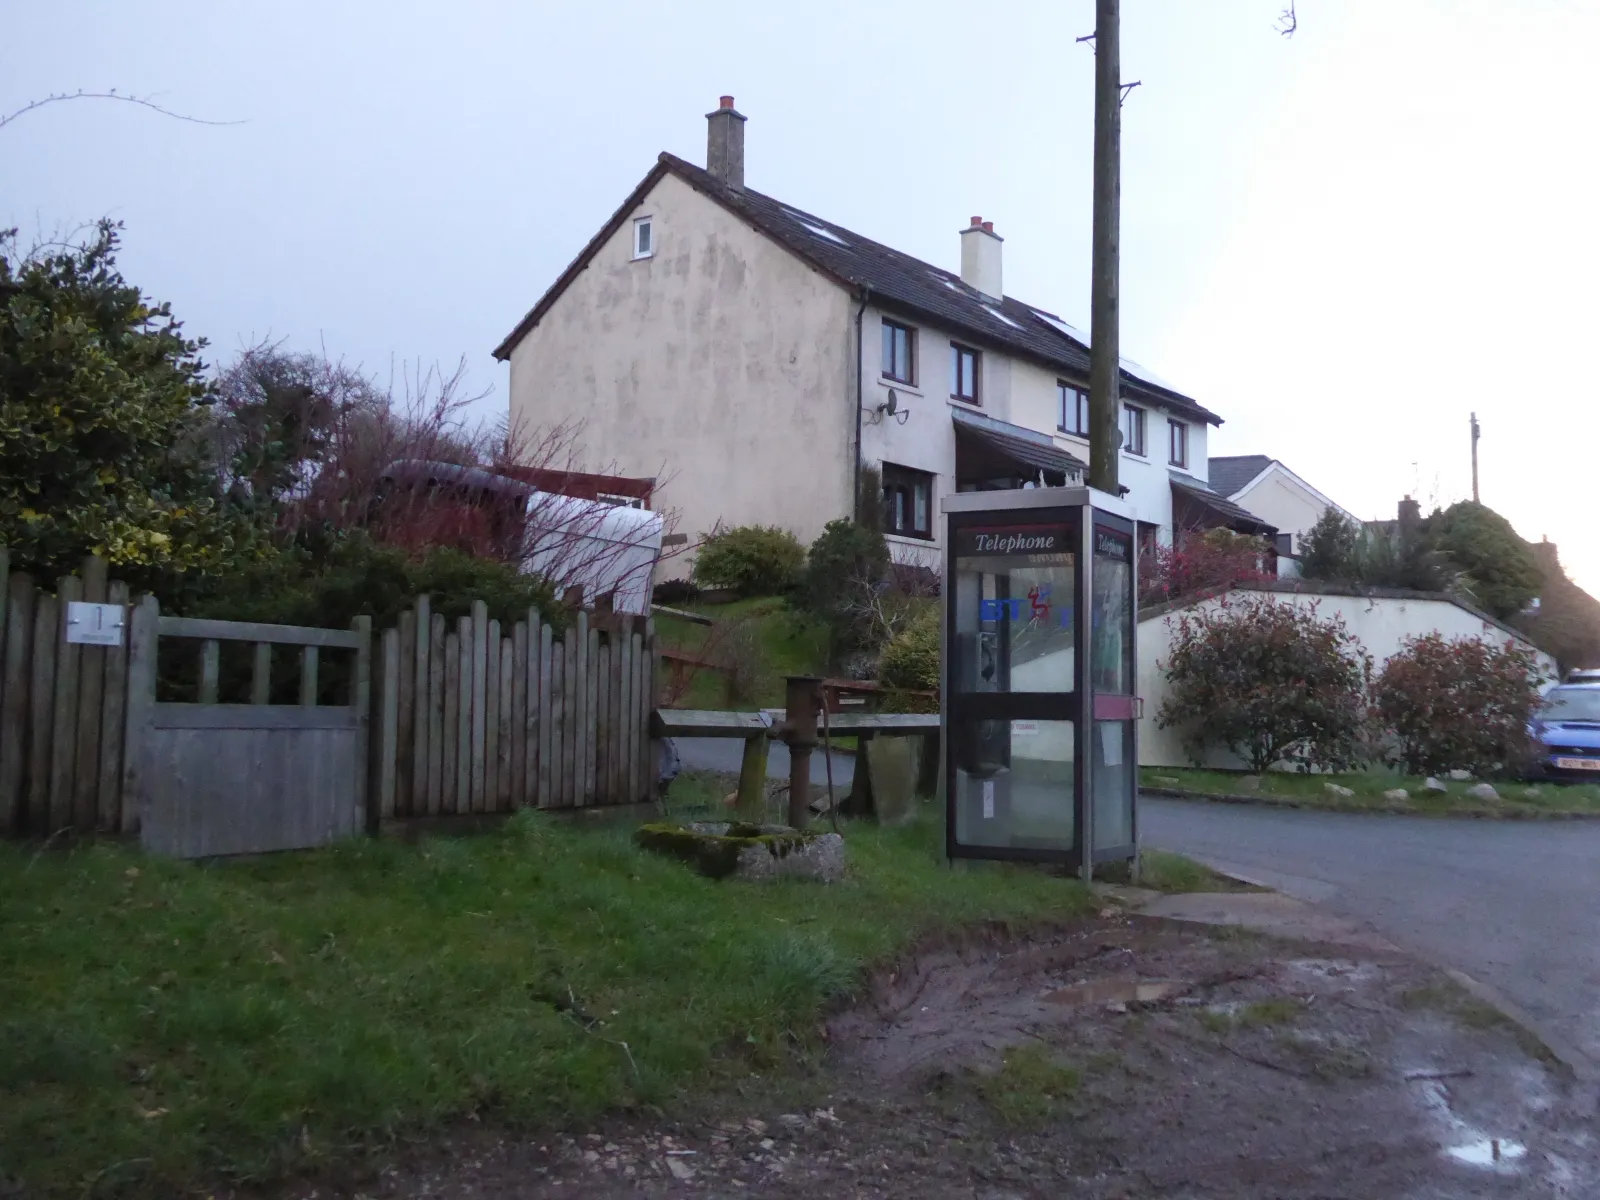 Photo showing: Pump and telephone box, Moreleigh